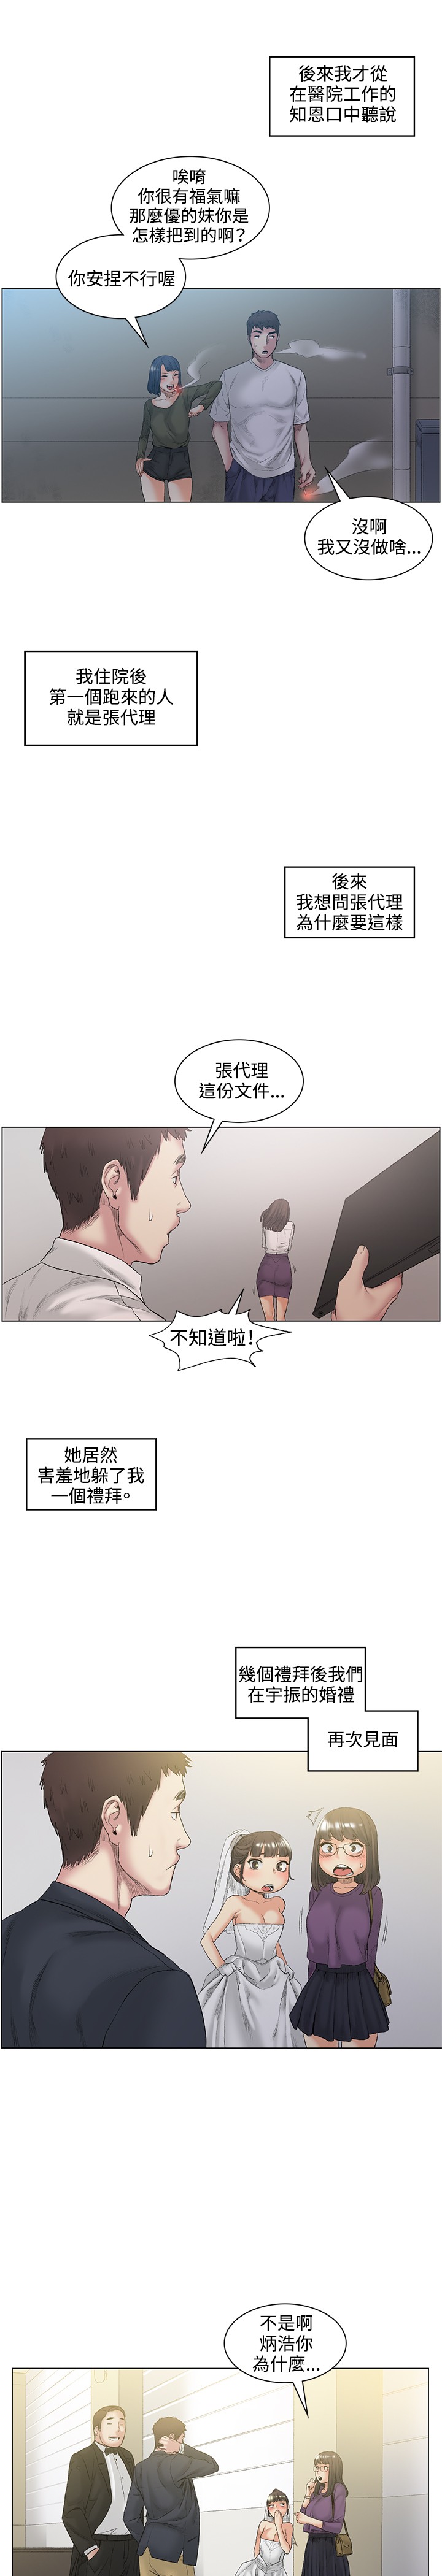 By Chance 偶然 Ch.52END (chinese) [嘮叨雞 &洋世] 偶然